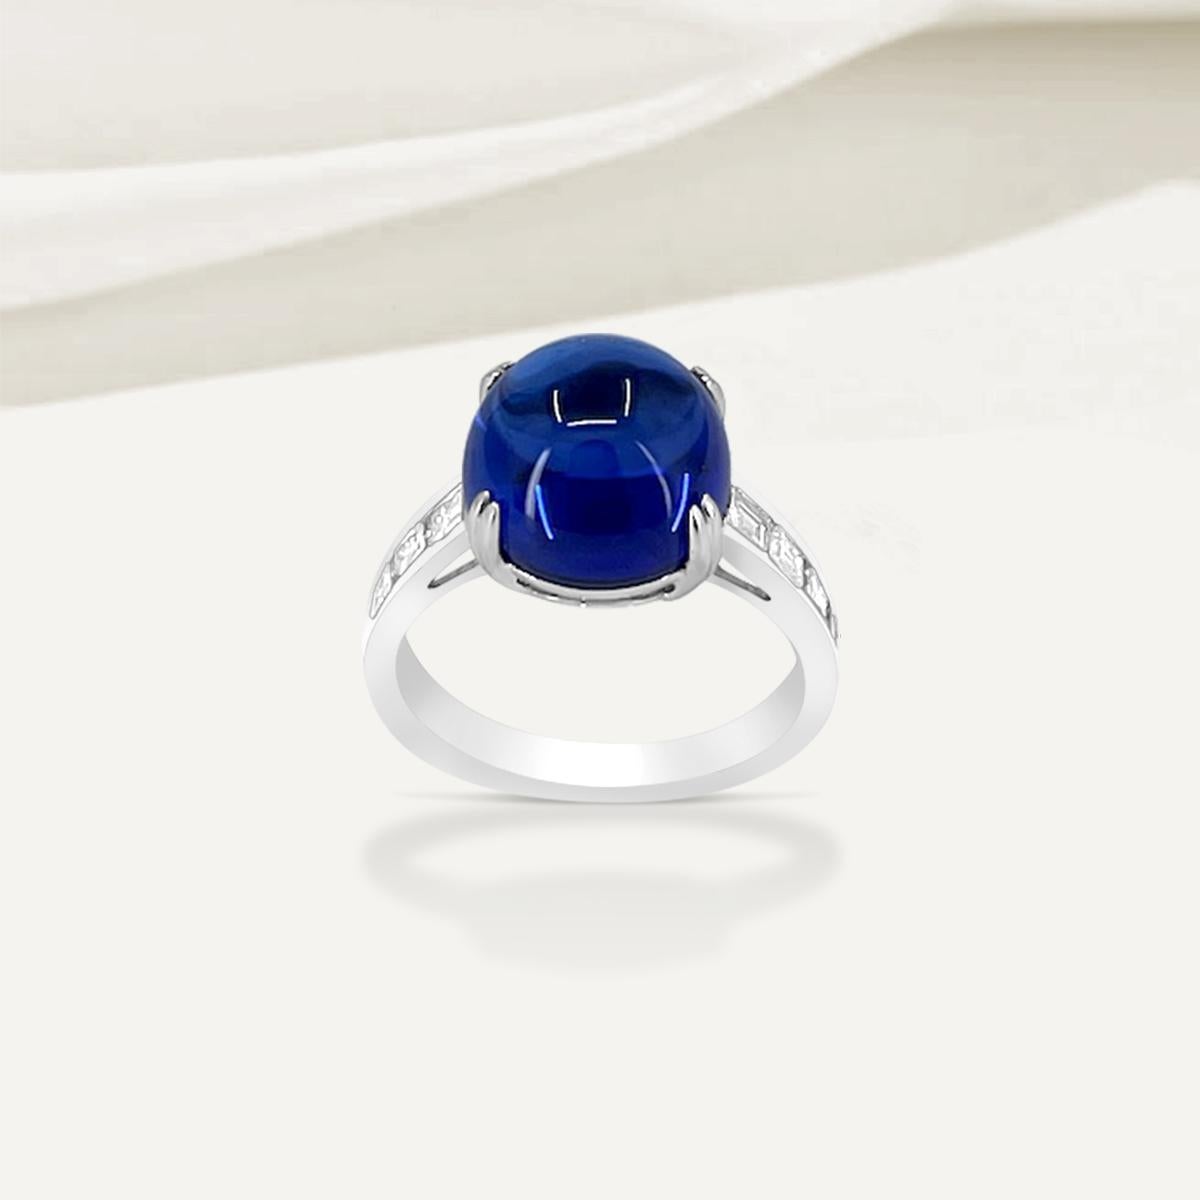 Modern 14K White Gold 7.92cts Tanzanite and Diamond Ring. Style# R3521 For Sale